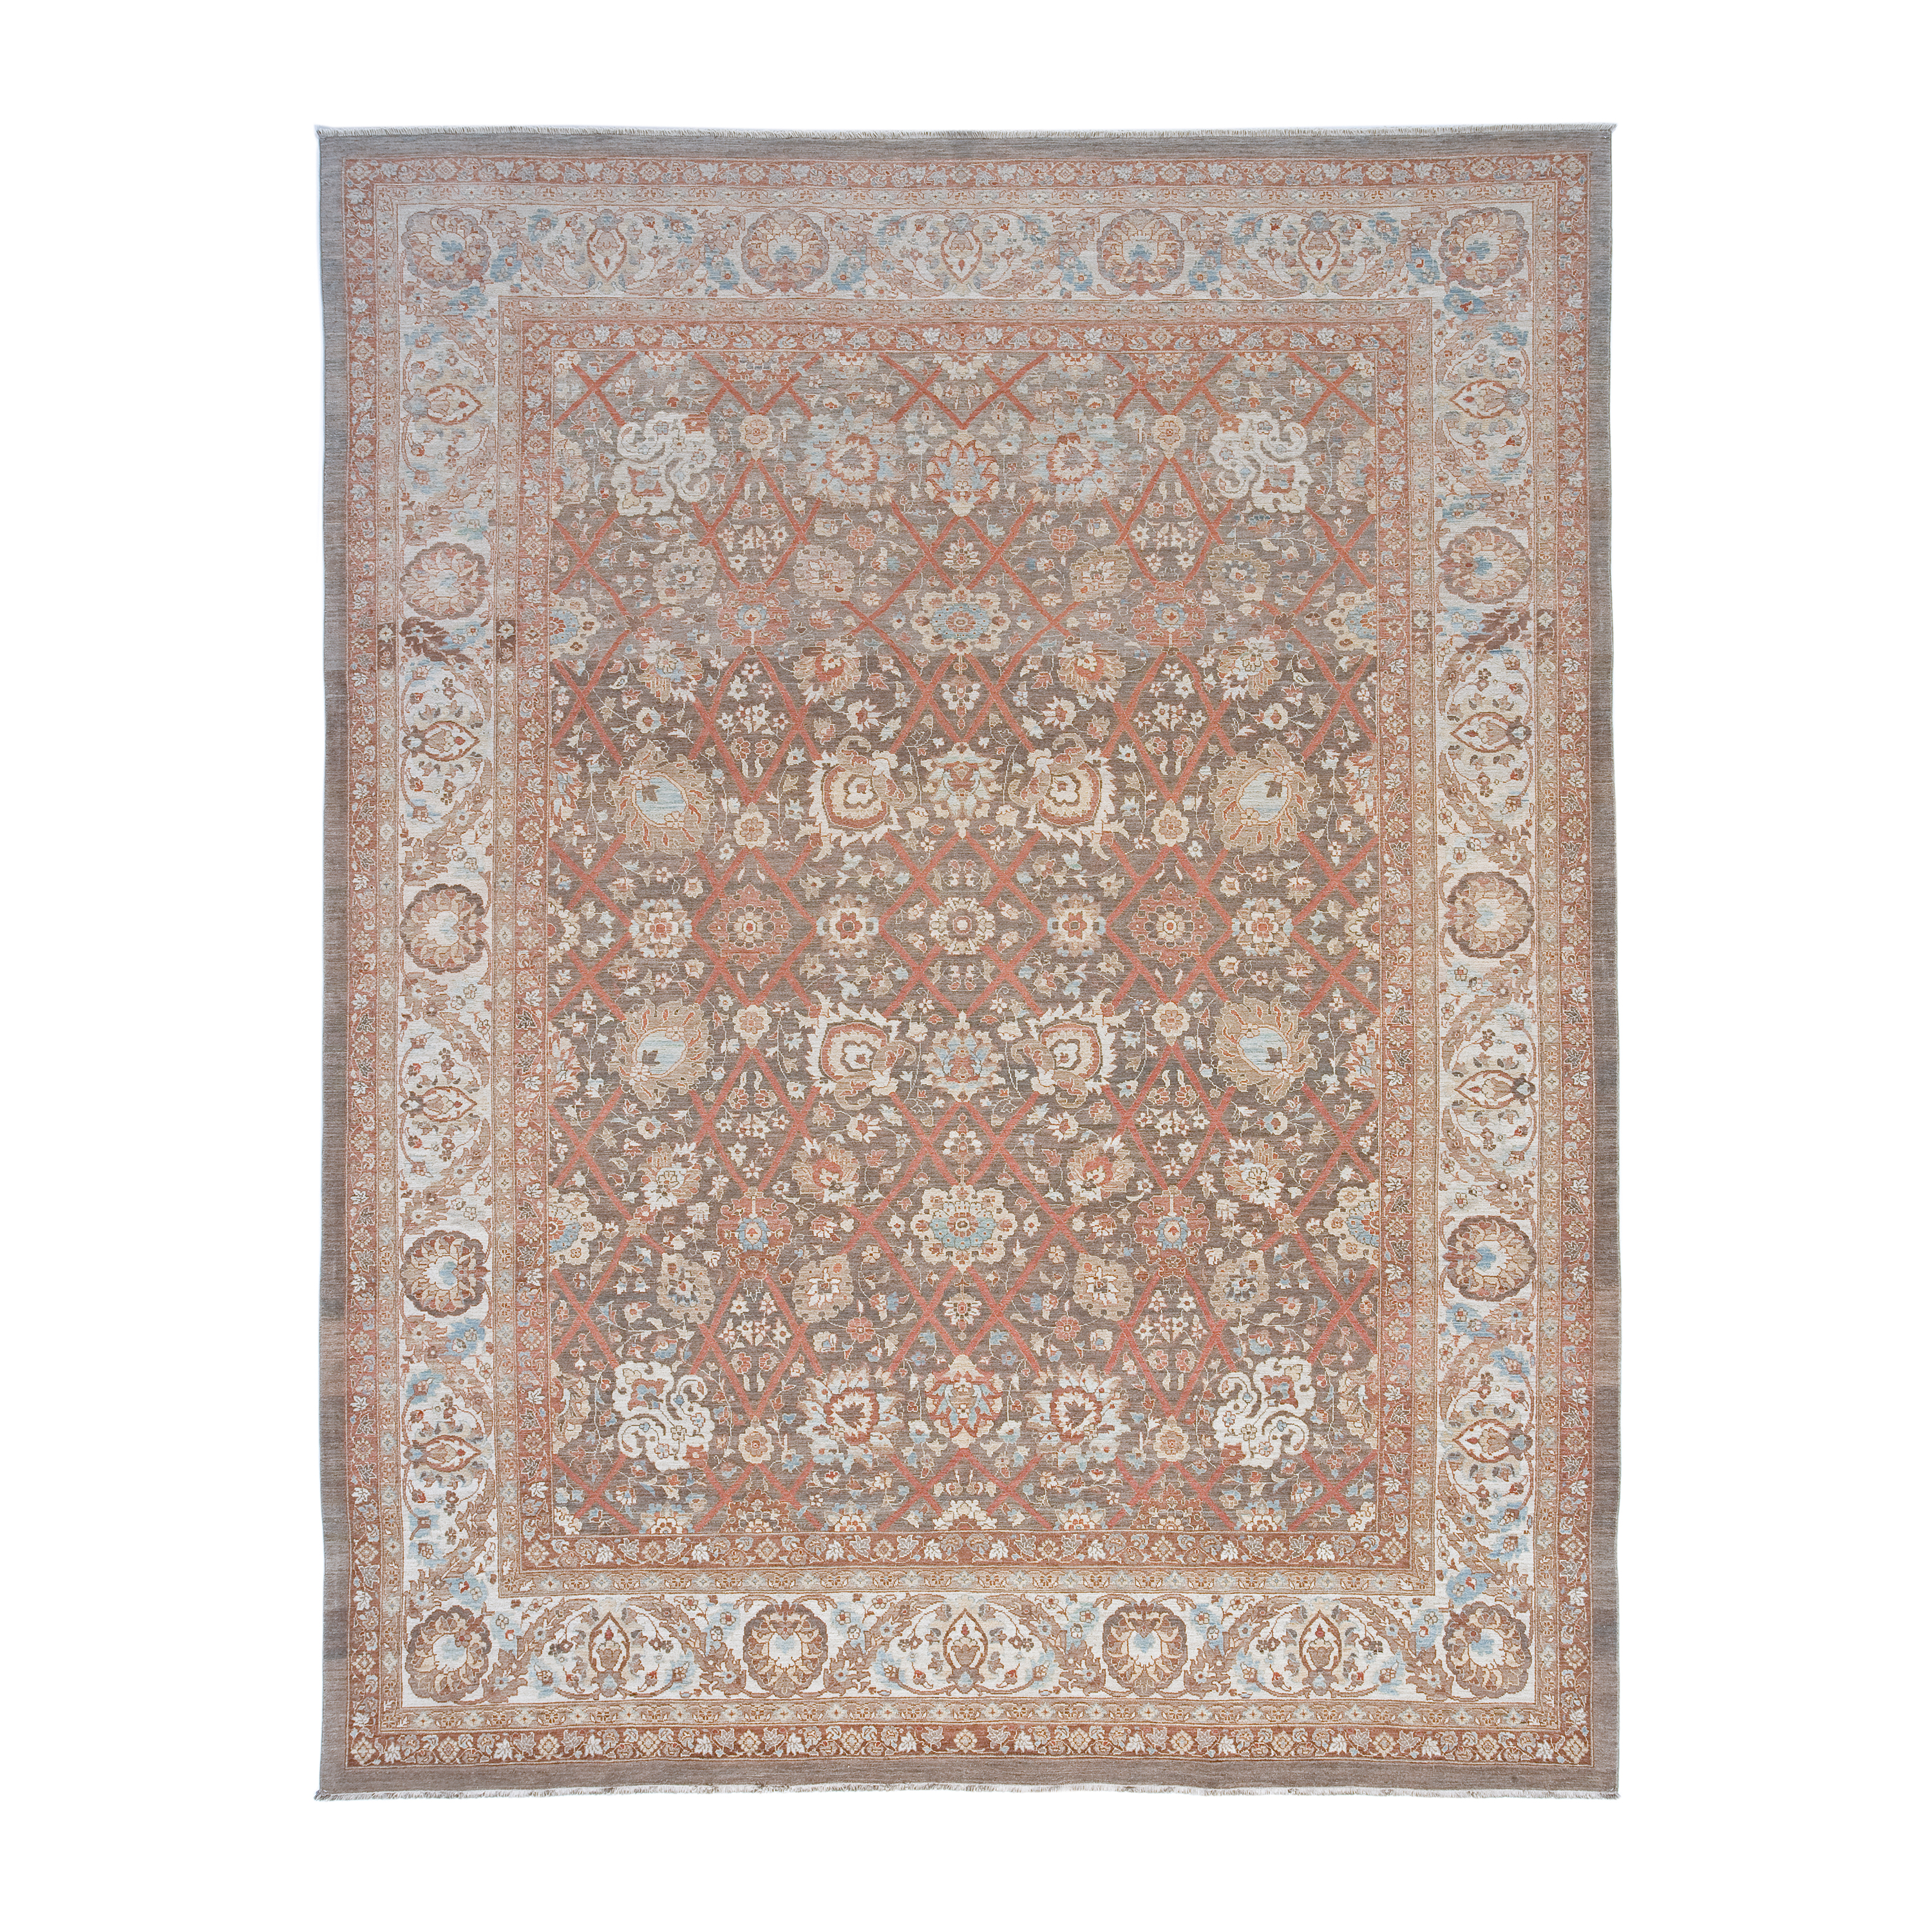 This Tabriz rug is one of kind traditional rug and made of 100% wool. 